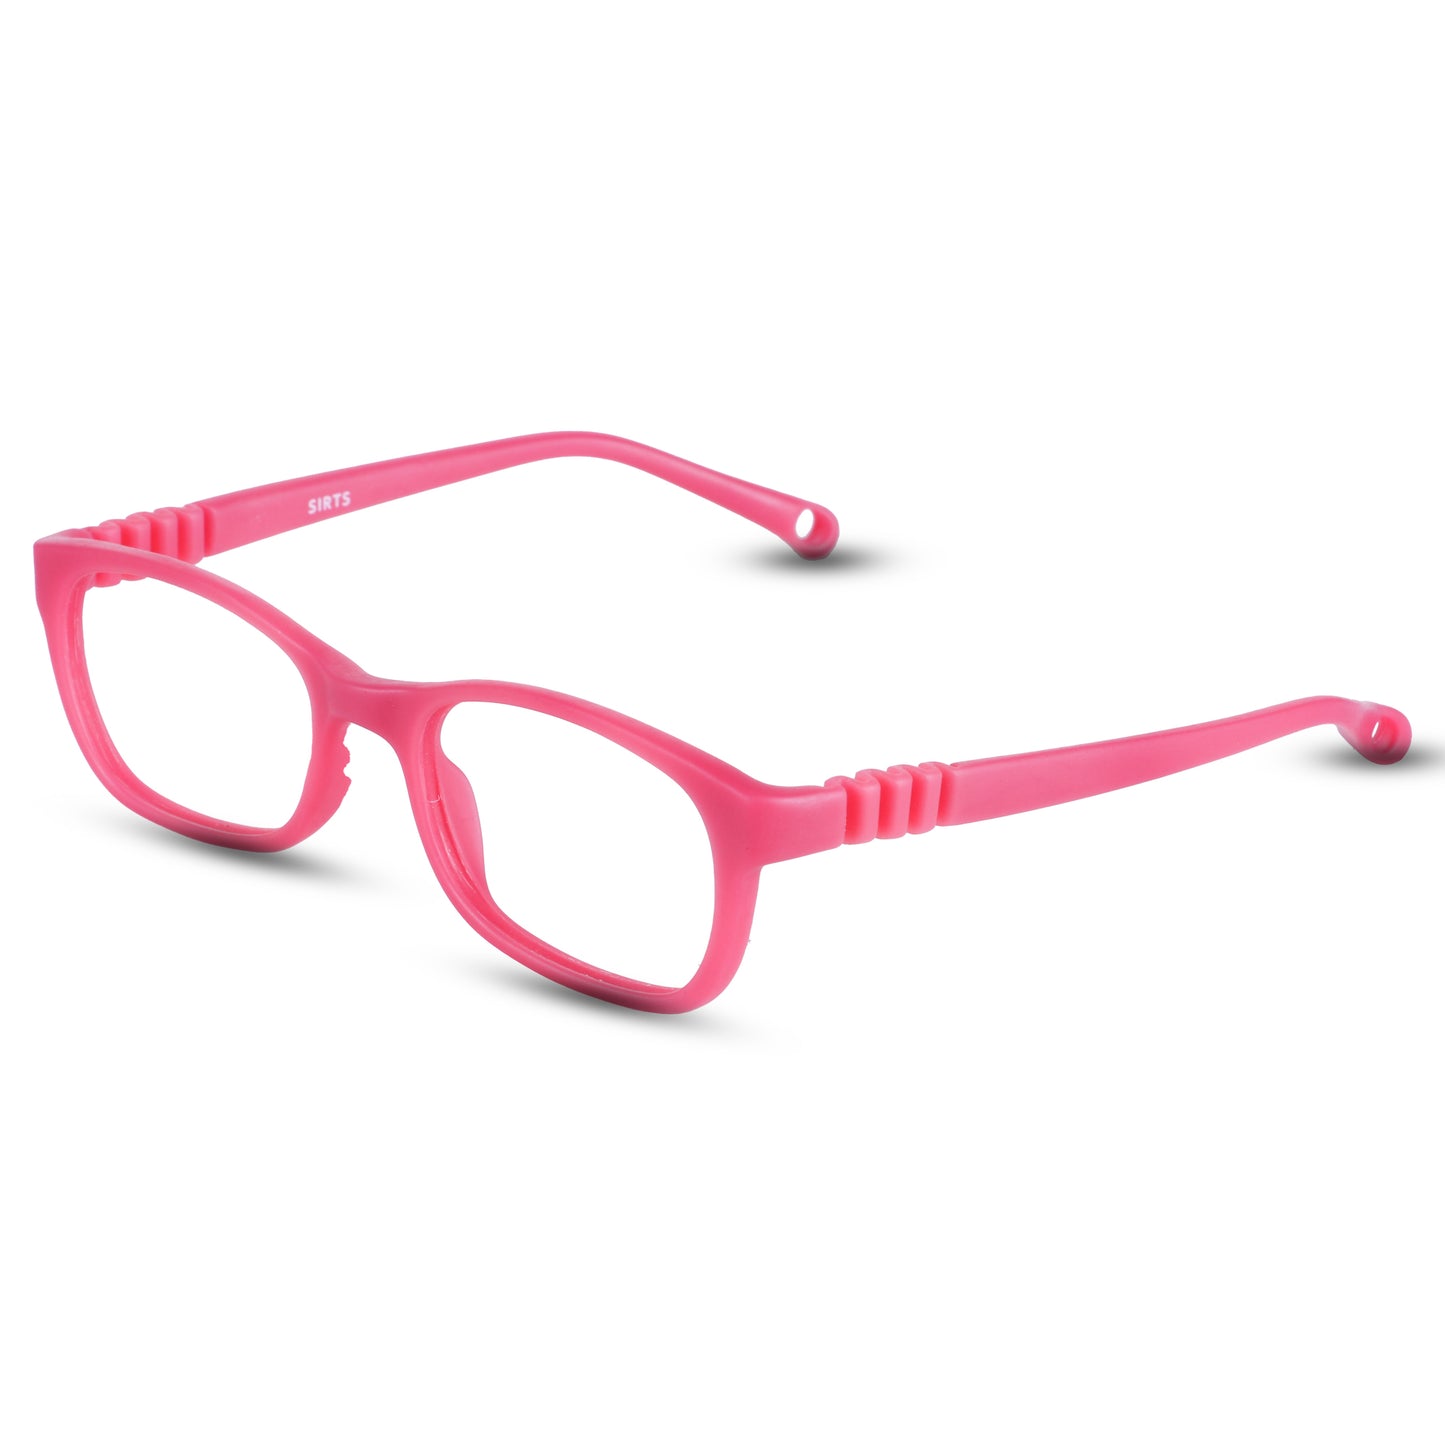 Sirts Pink Square Flexible With Silicon Band TR869